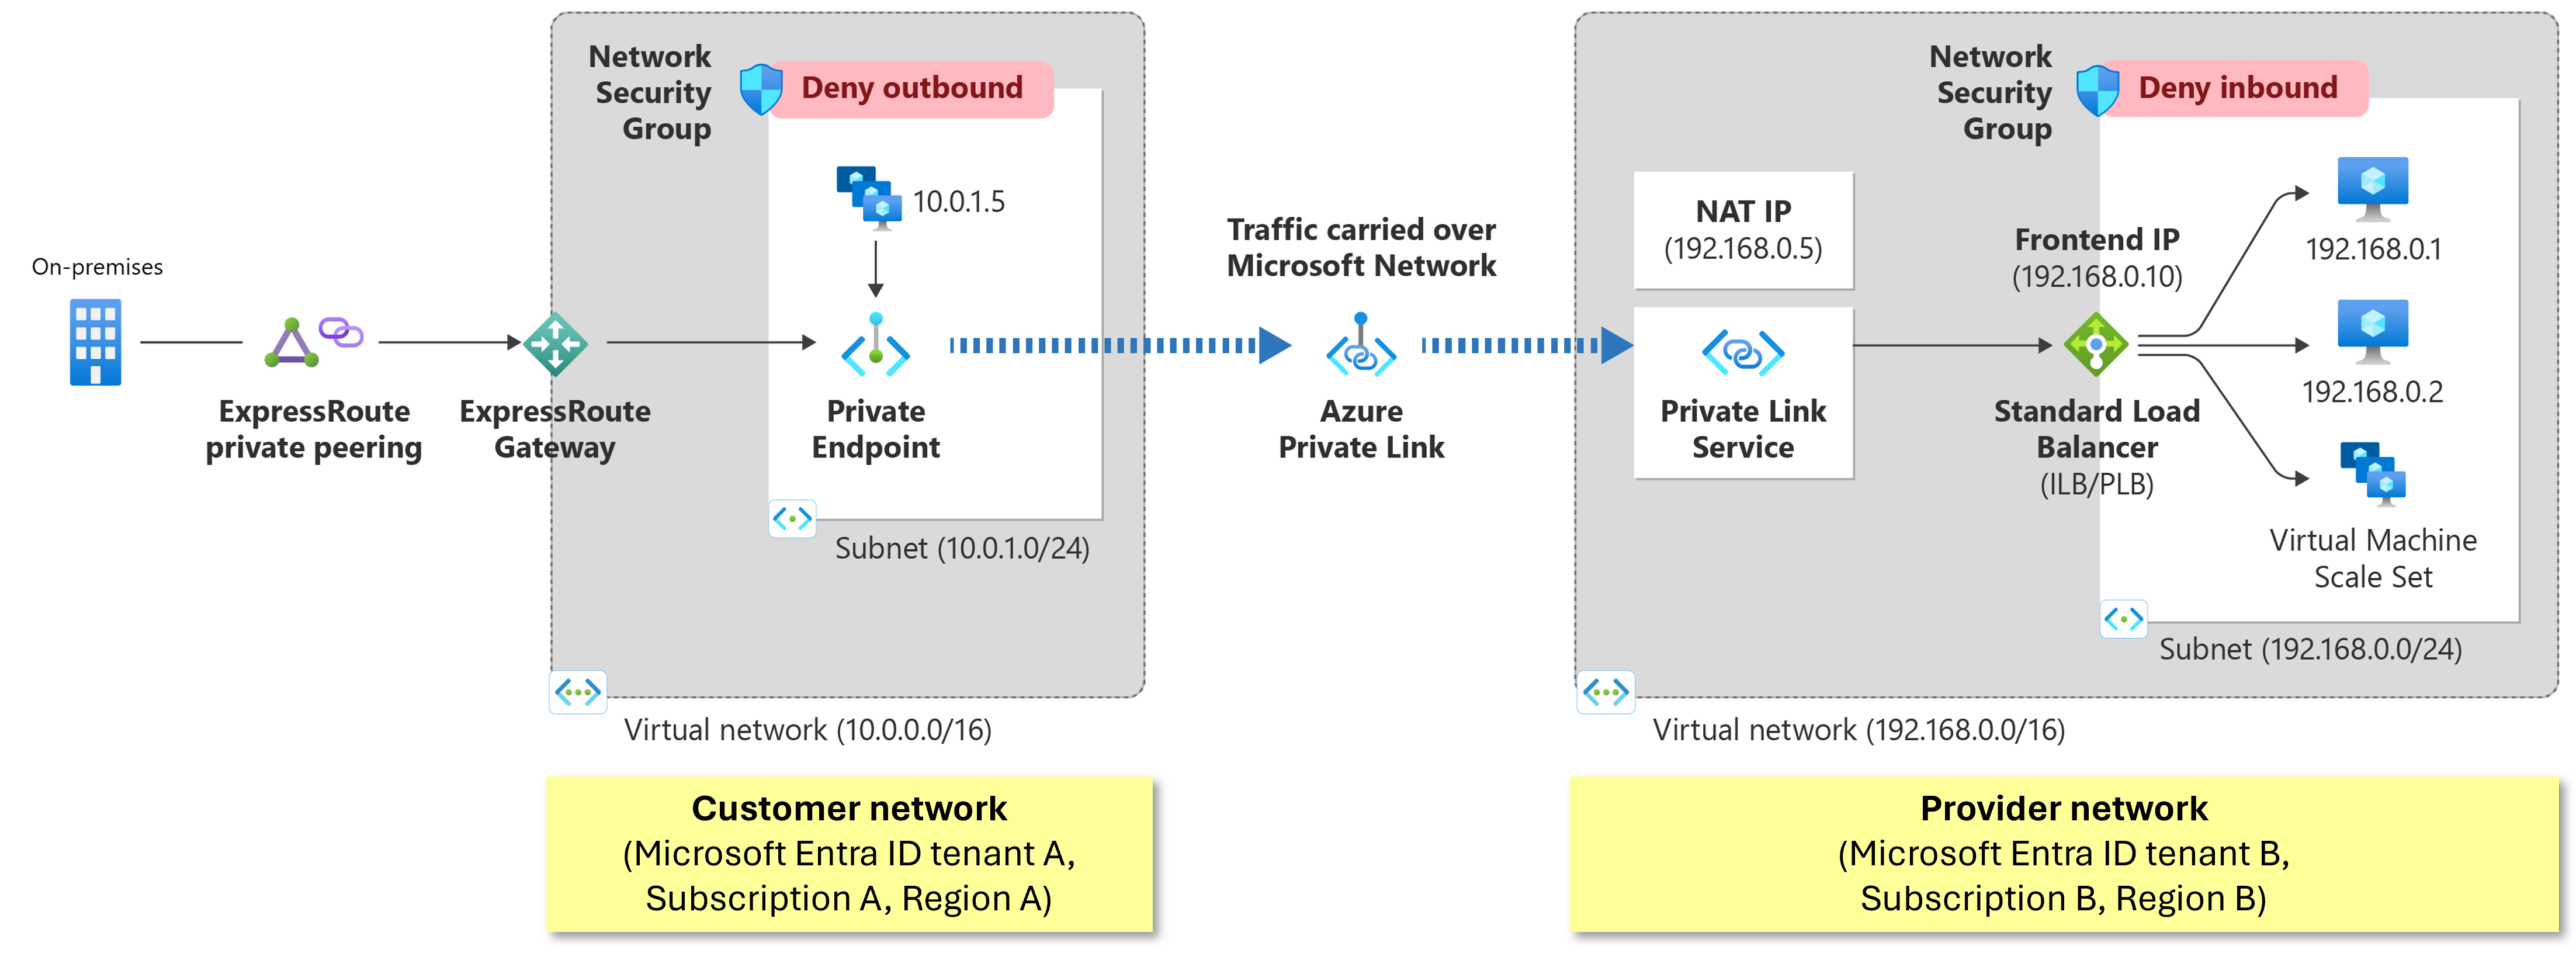 Diagram showing how service that is running behind Azure Standard Load Balancer can be enabled for Private Link access.